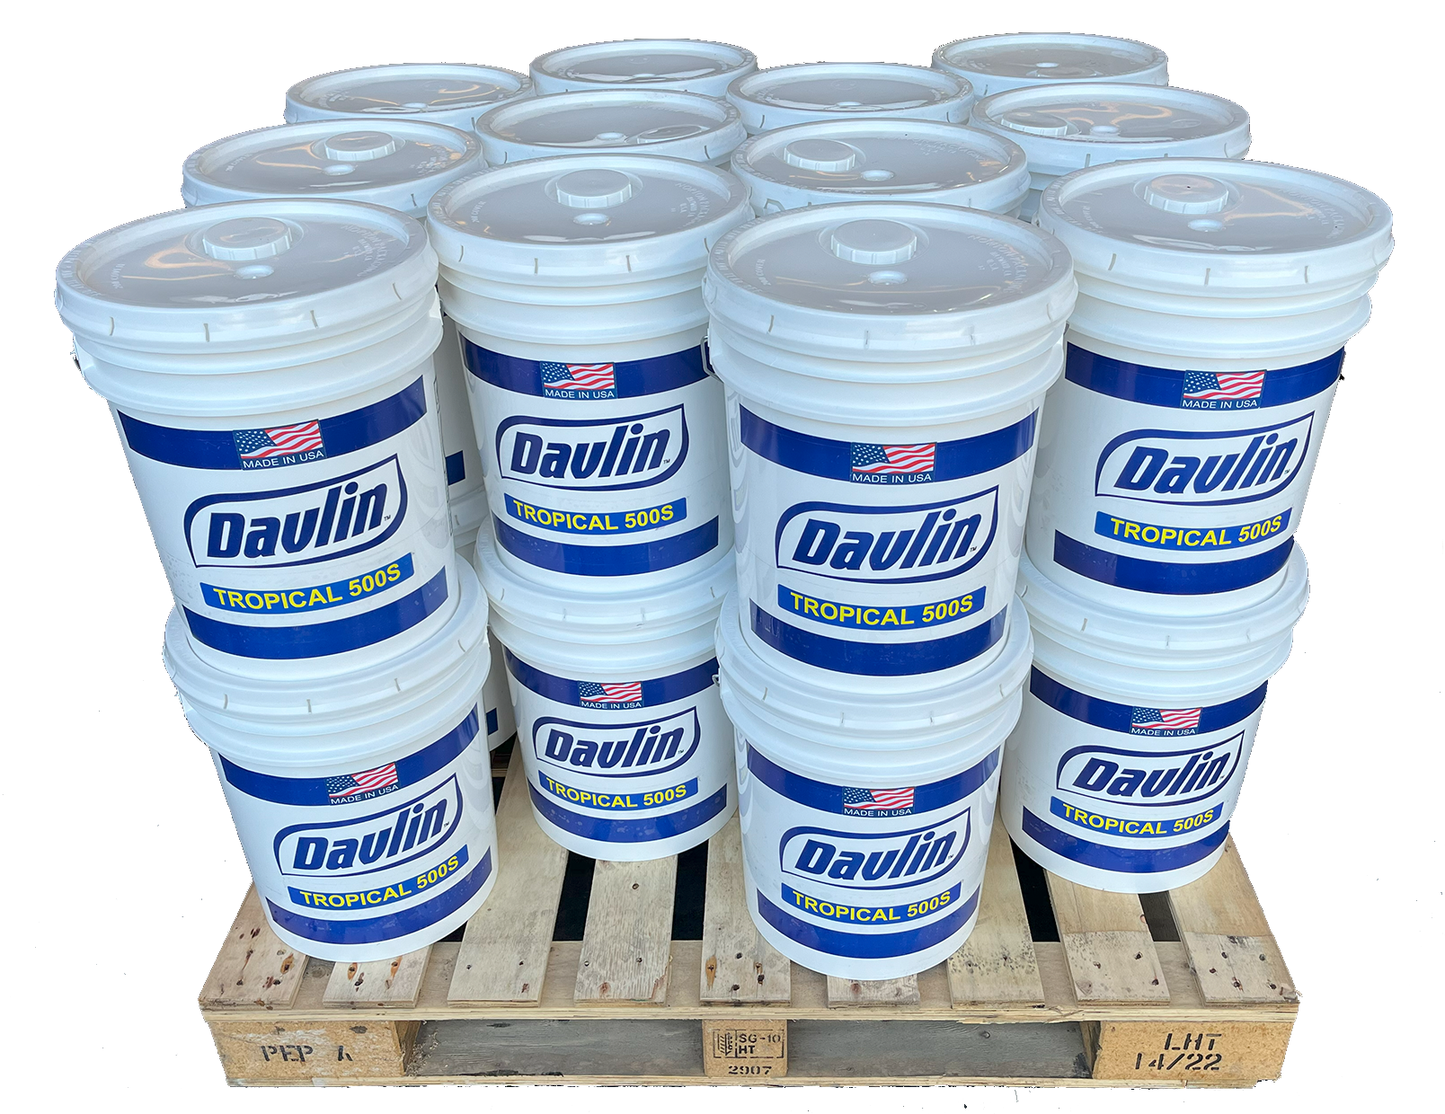 Tropical Roof Coating In Bulk - Whole Pallet 24 x 5 gal Bucket -Elastomeric Roof Coating 500S - Free Shipping - Free Sample